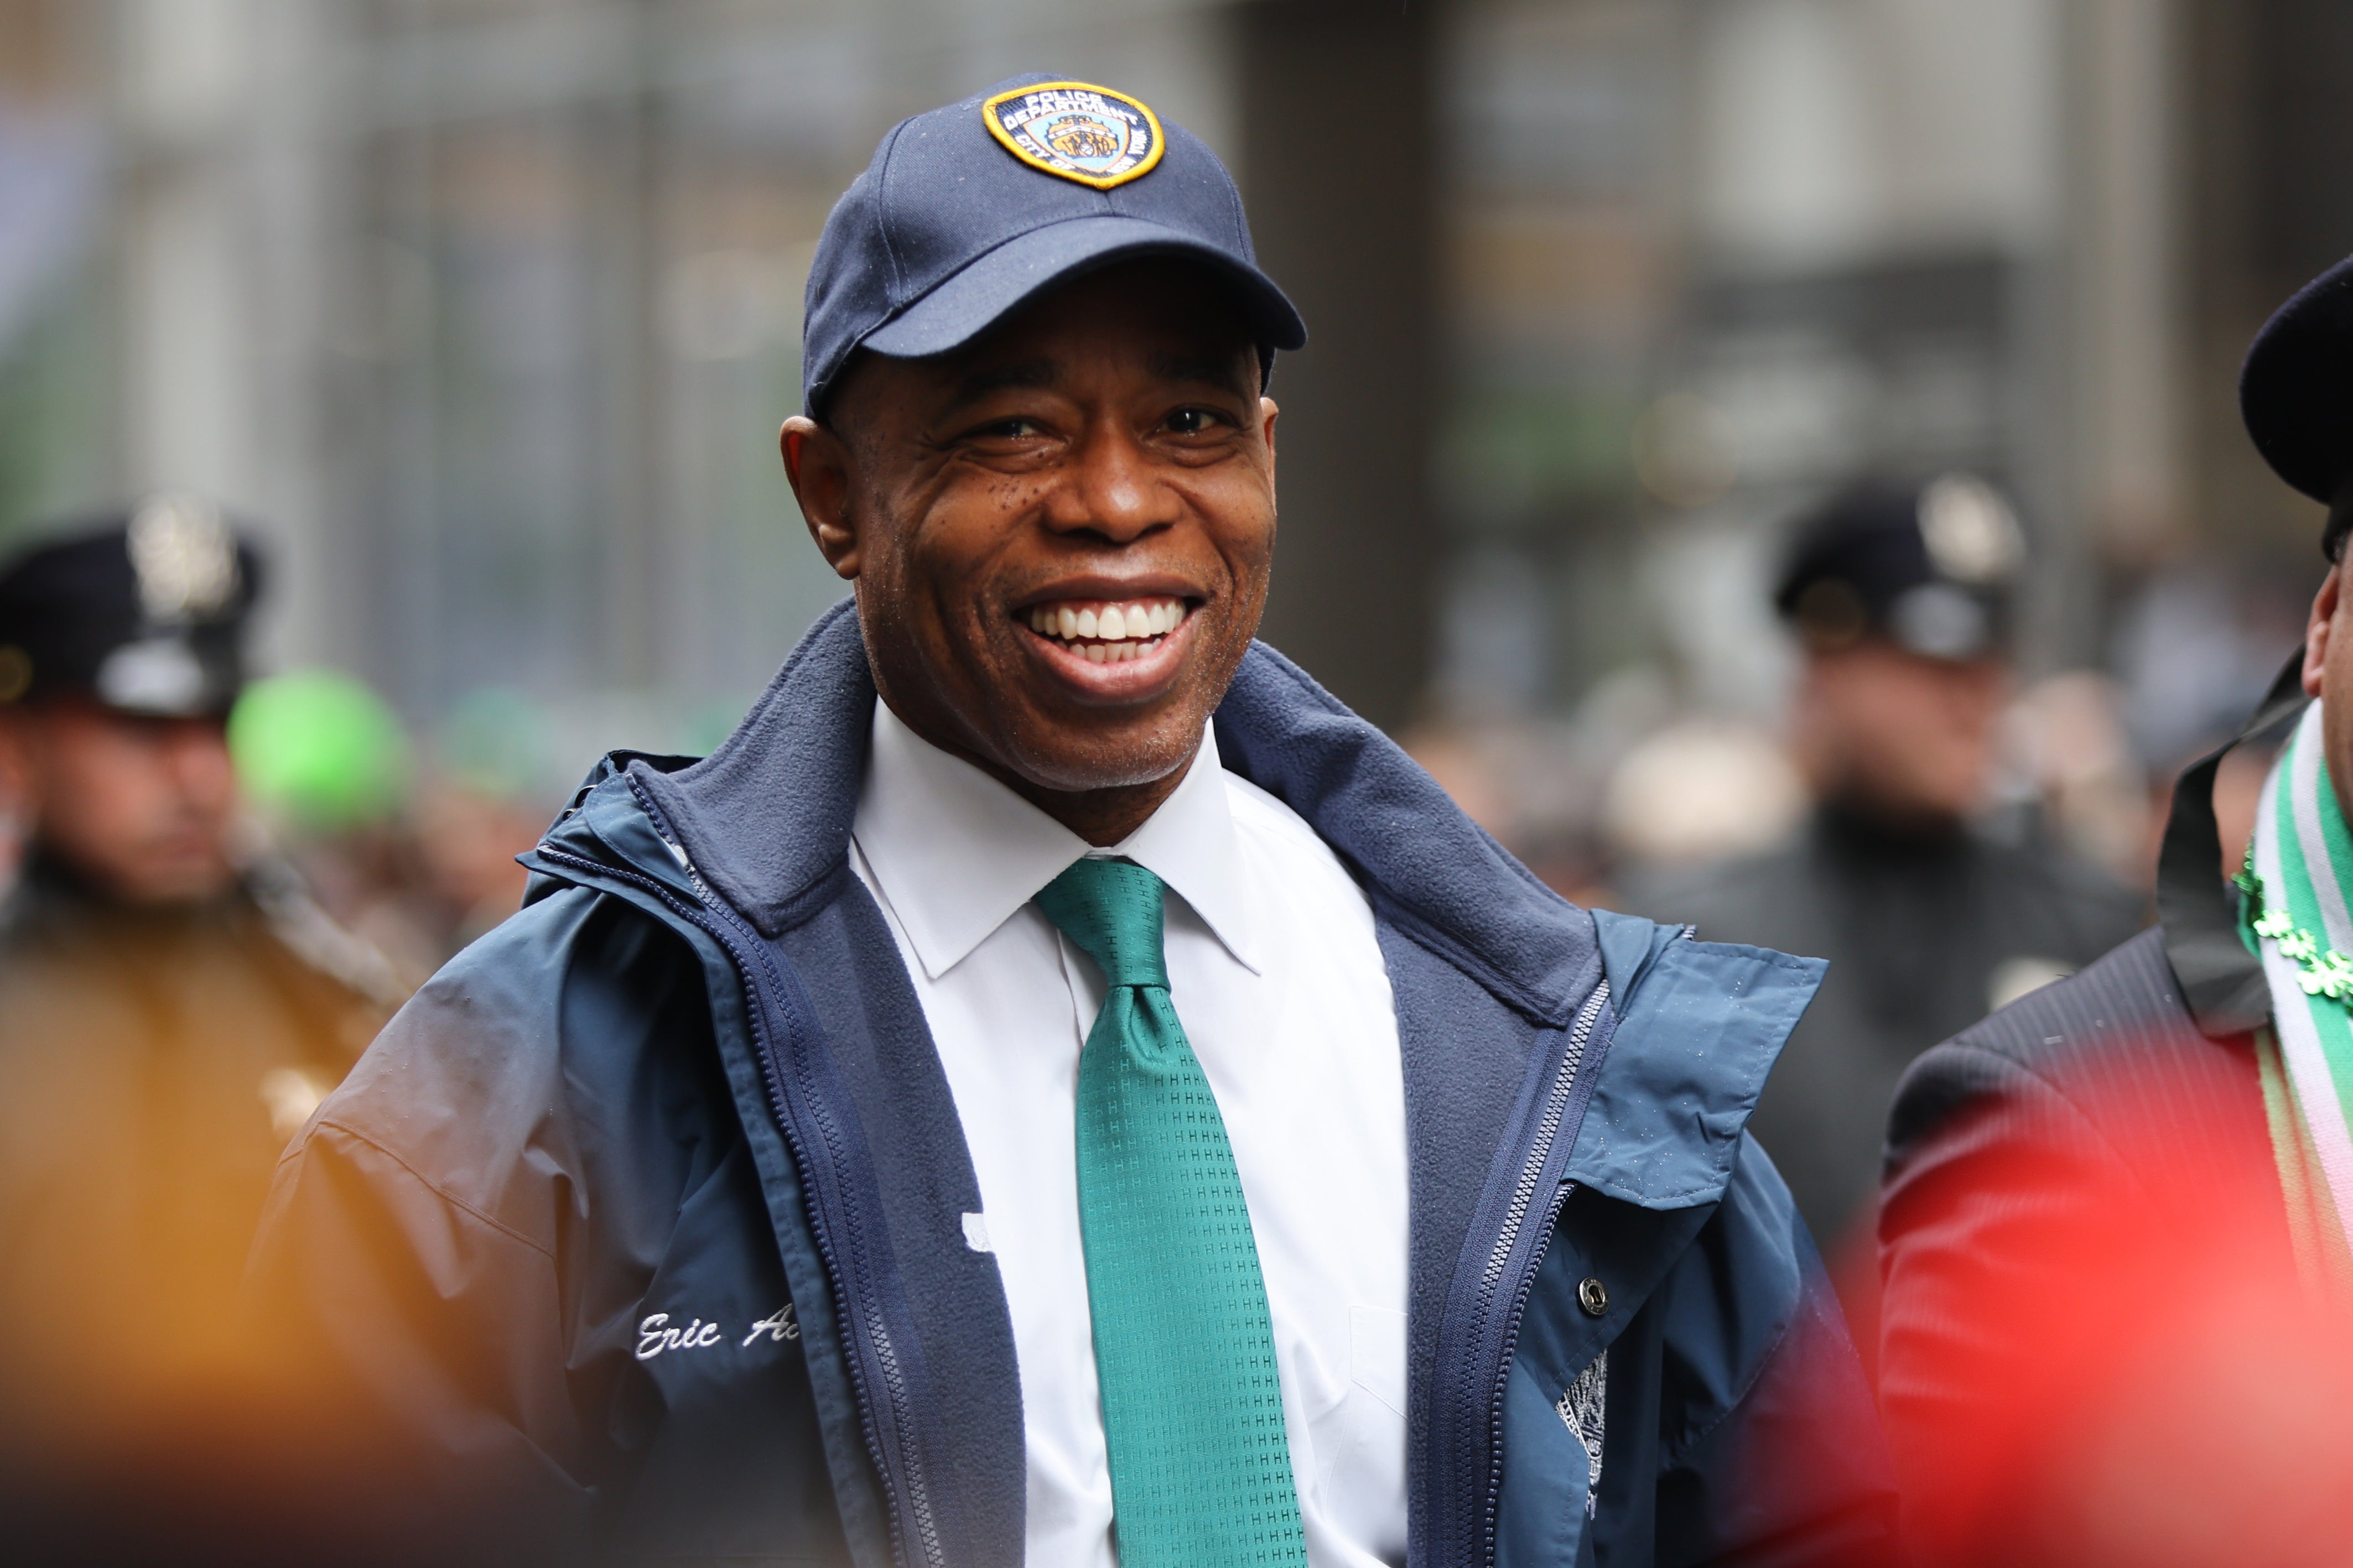 New York City mayor Eric Adams, wearing a green tie and an NYPD hat, smiles as he walks in a St. Patrick's Day parade.